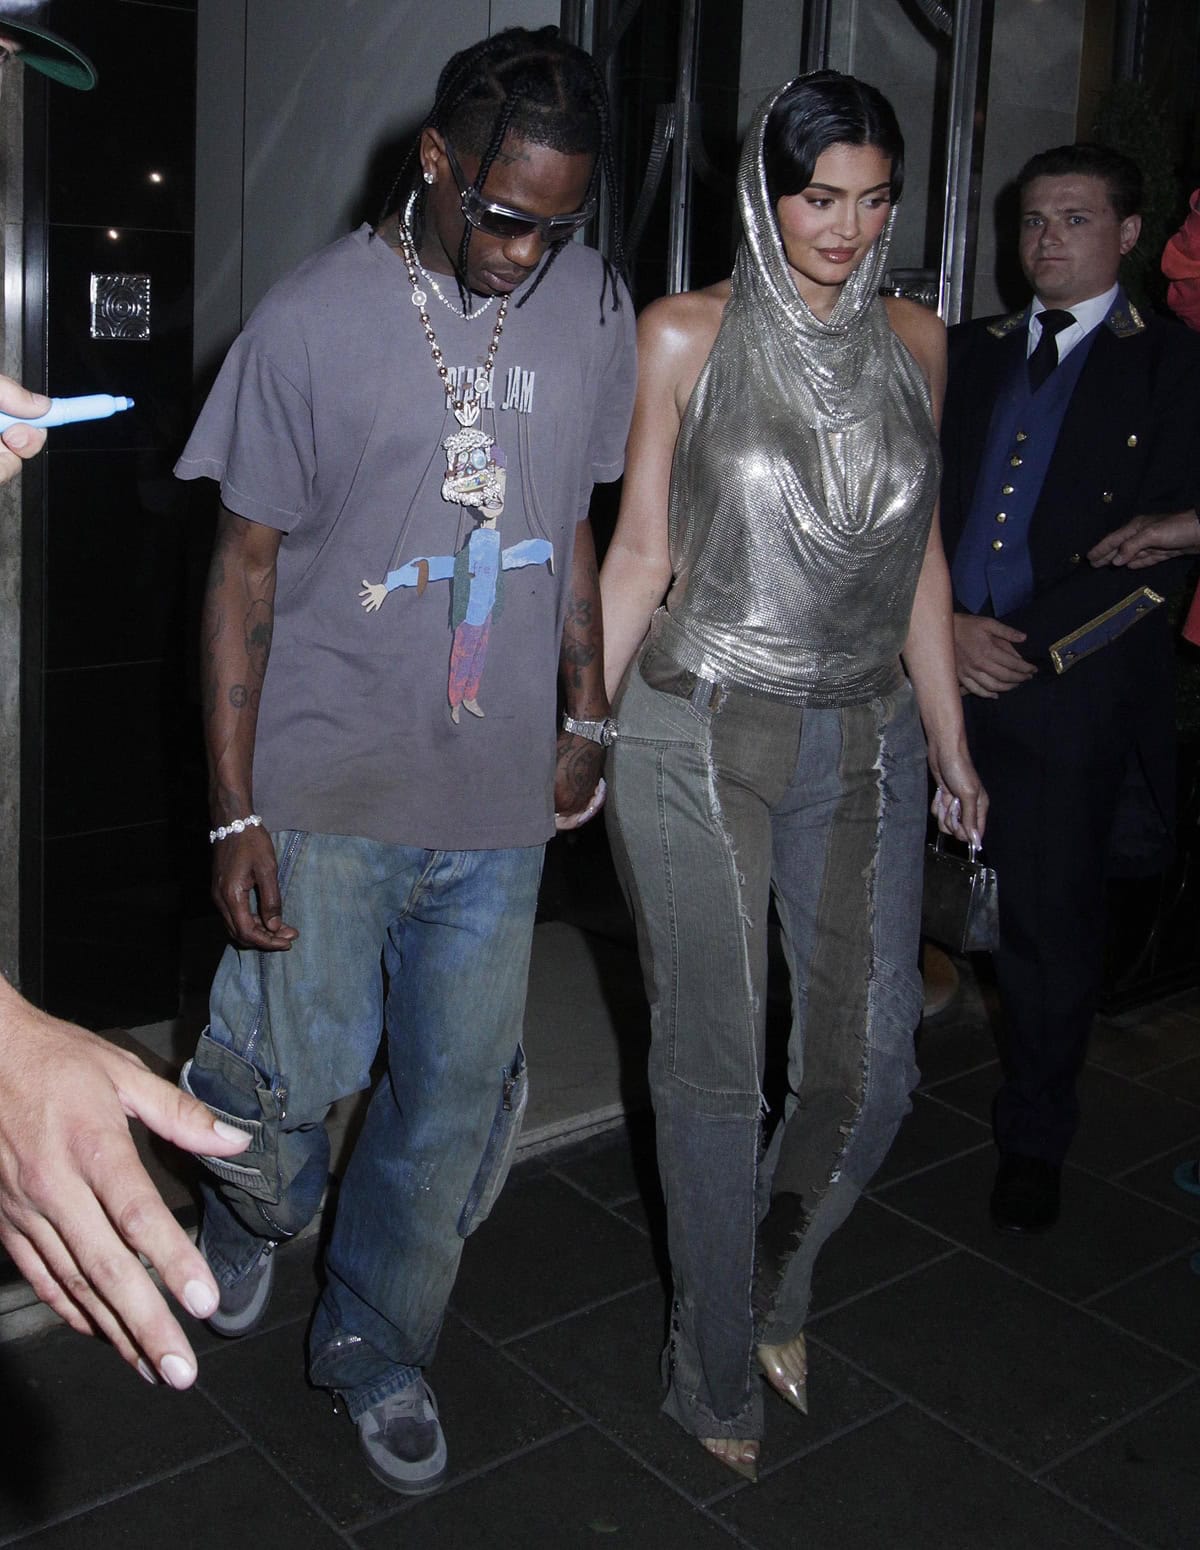 Elevated by her heels, Kylie Jenner stands nearly as tall as Travis Scott, the couple's height difference nearly vanishing as they step out in London